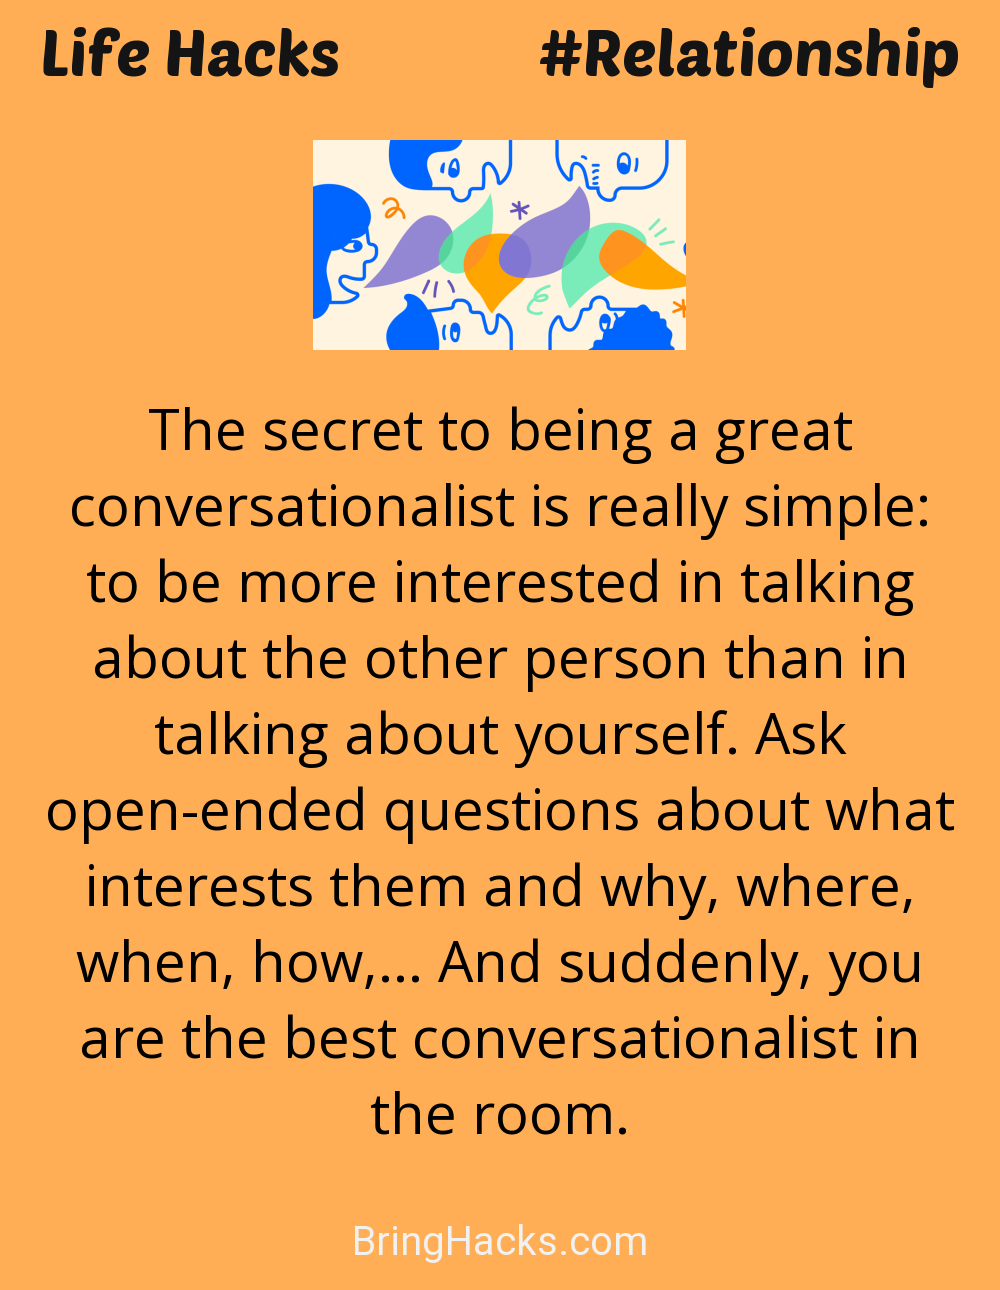 Life Hacks: - The secret to being a great conversationalist is really simple: to be more interested in talking about the other person than in talking about yourself. Ask open-ended questions about what interests them and why, where, when, how,... And suddenly, you are the best conversationalist in the room.